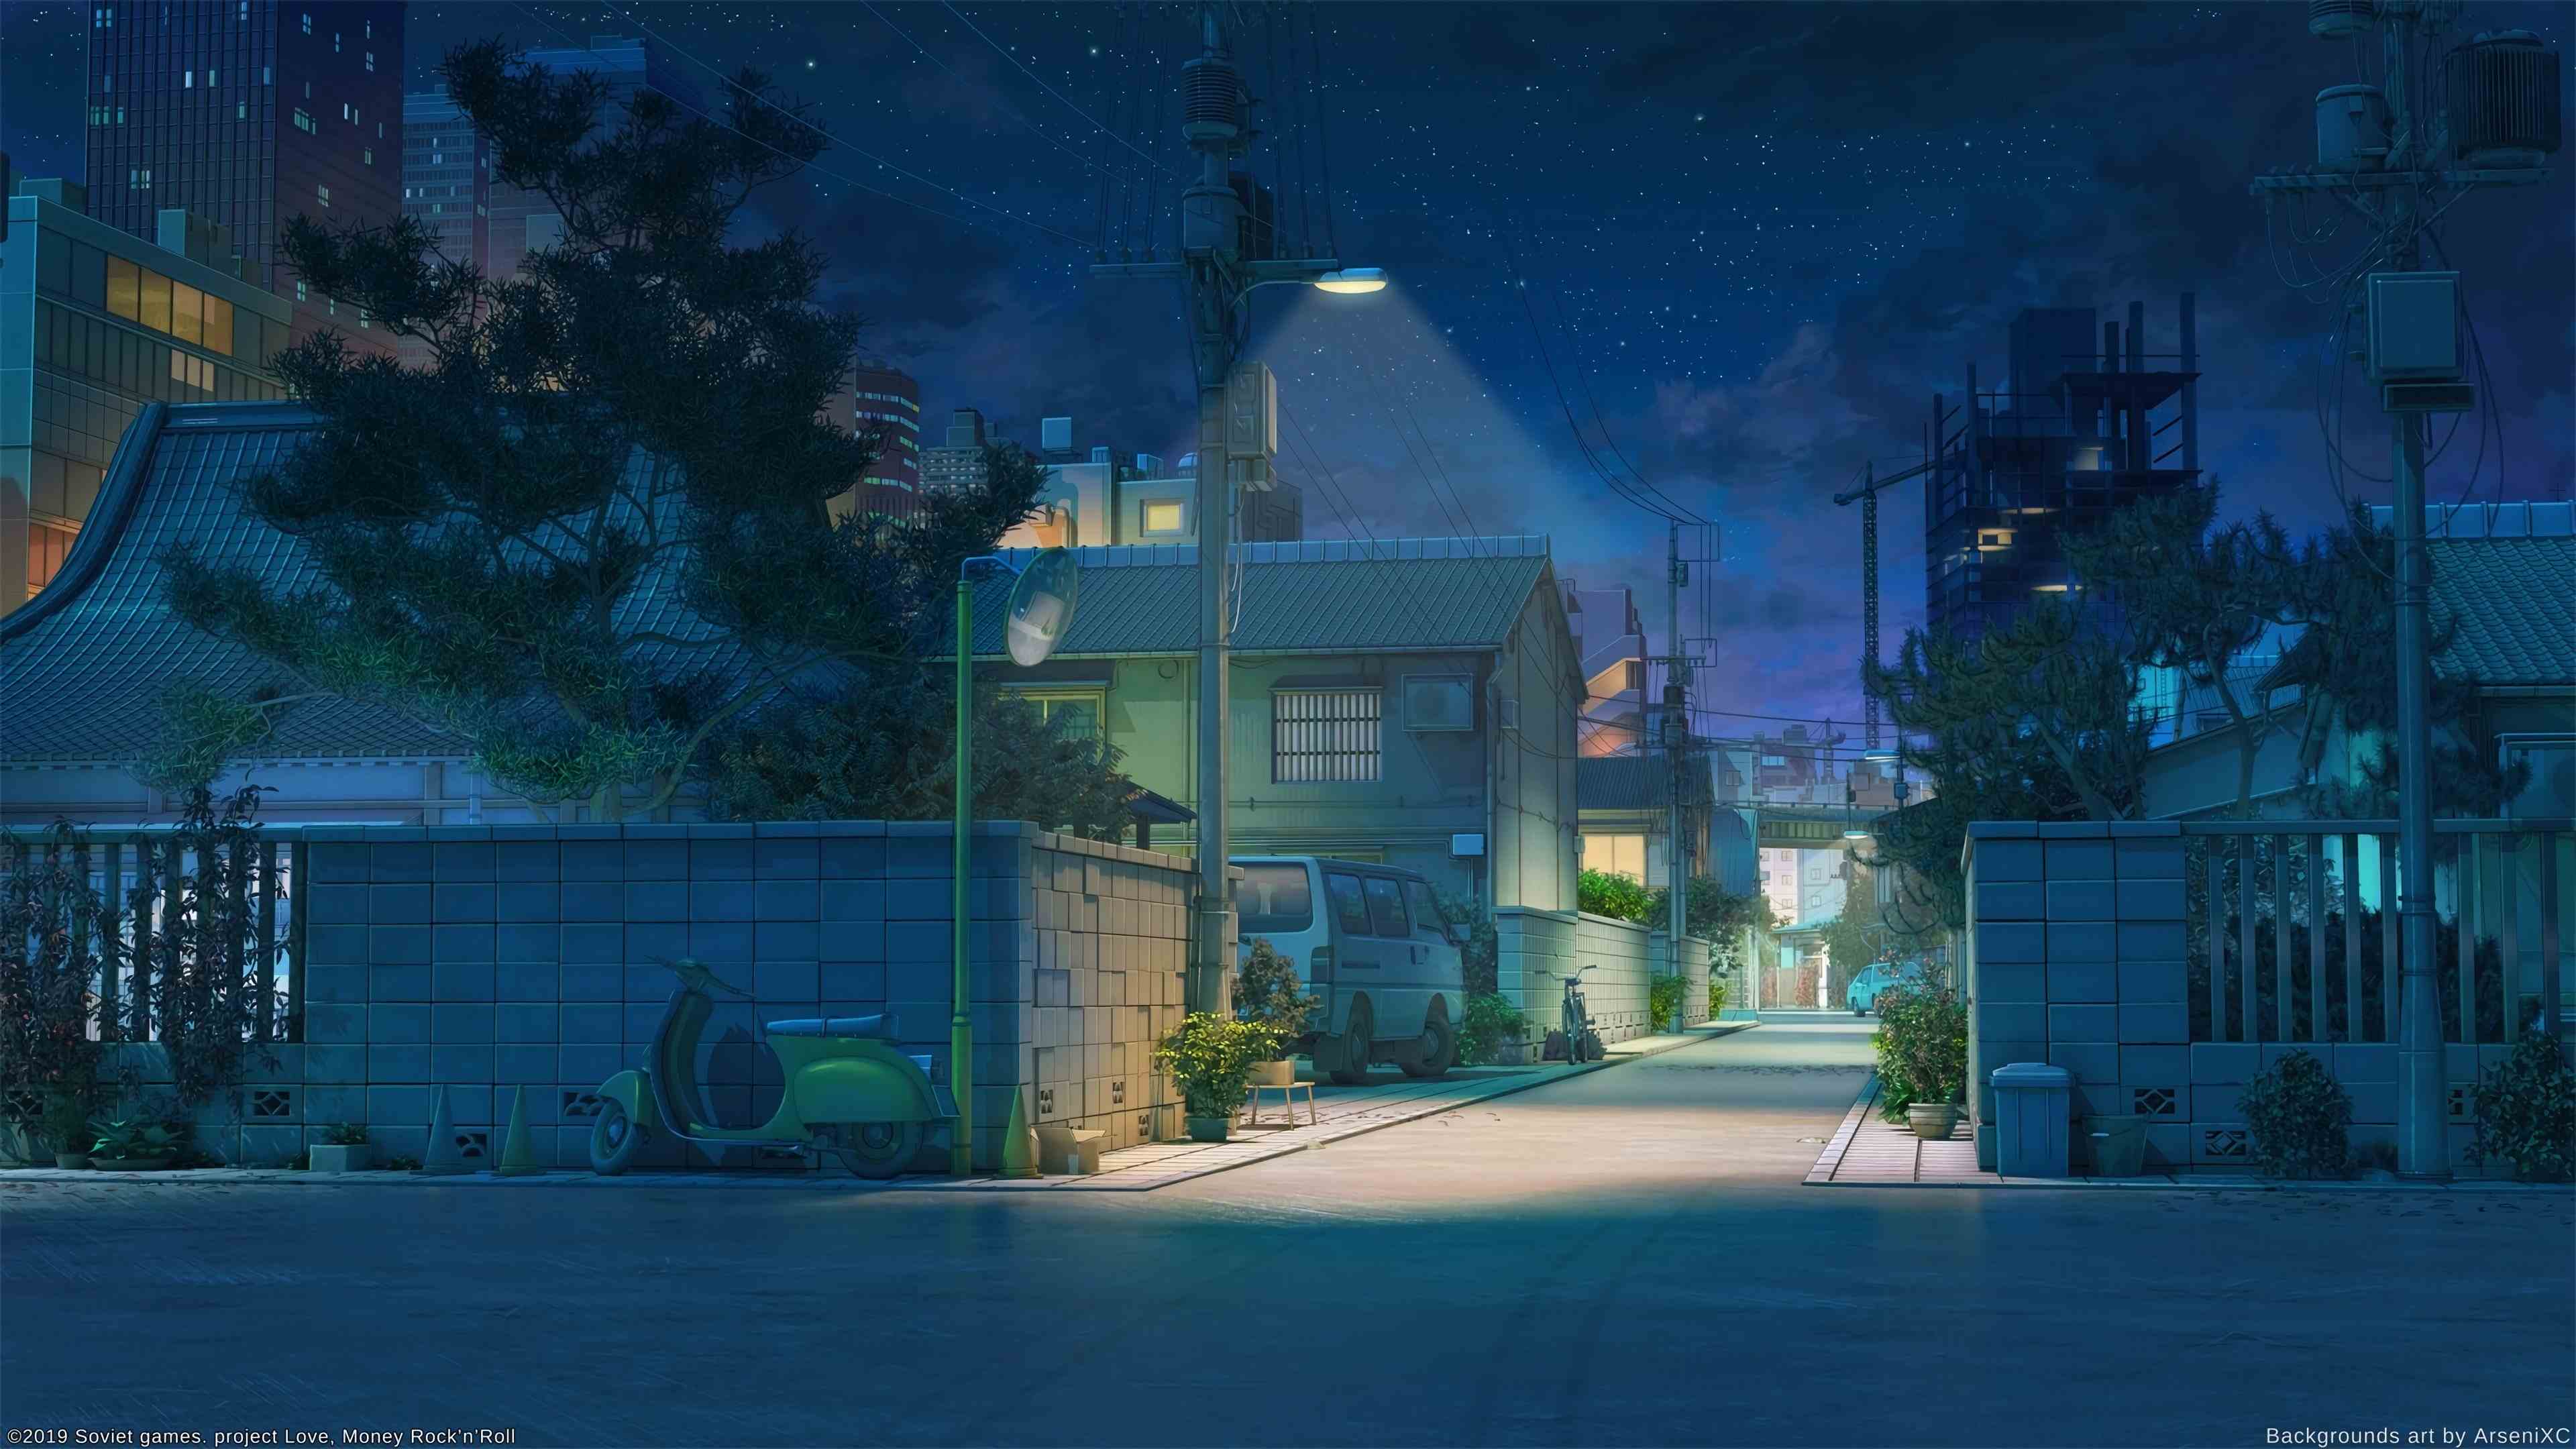 anime wallpaper phone,sky,blue,house,architecture,night